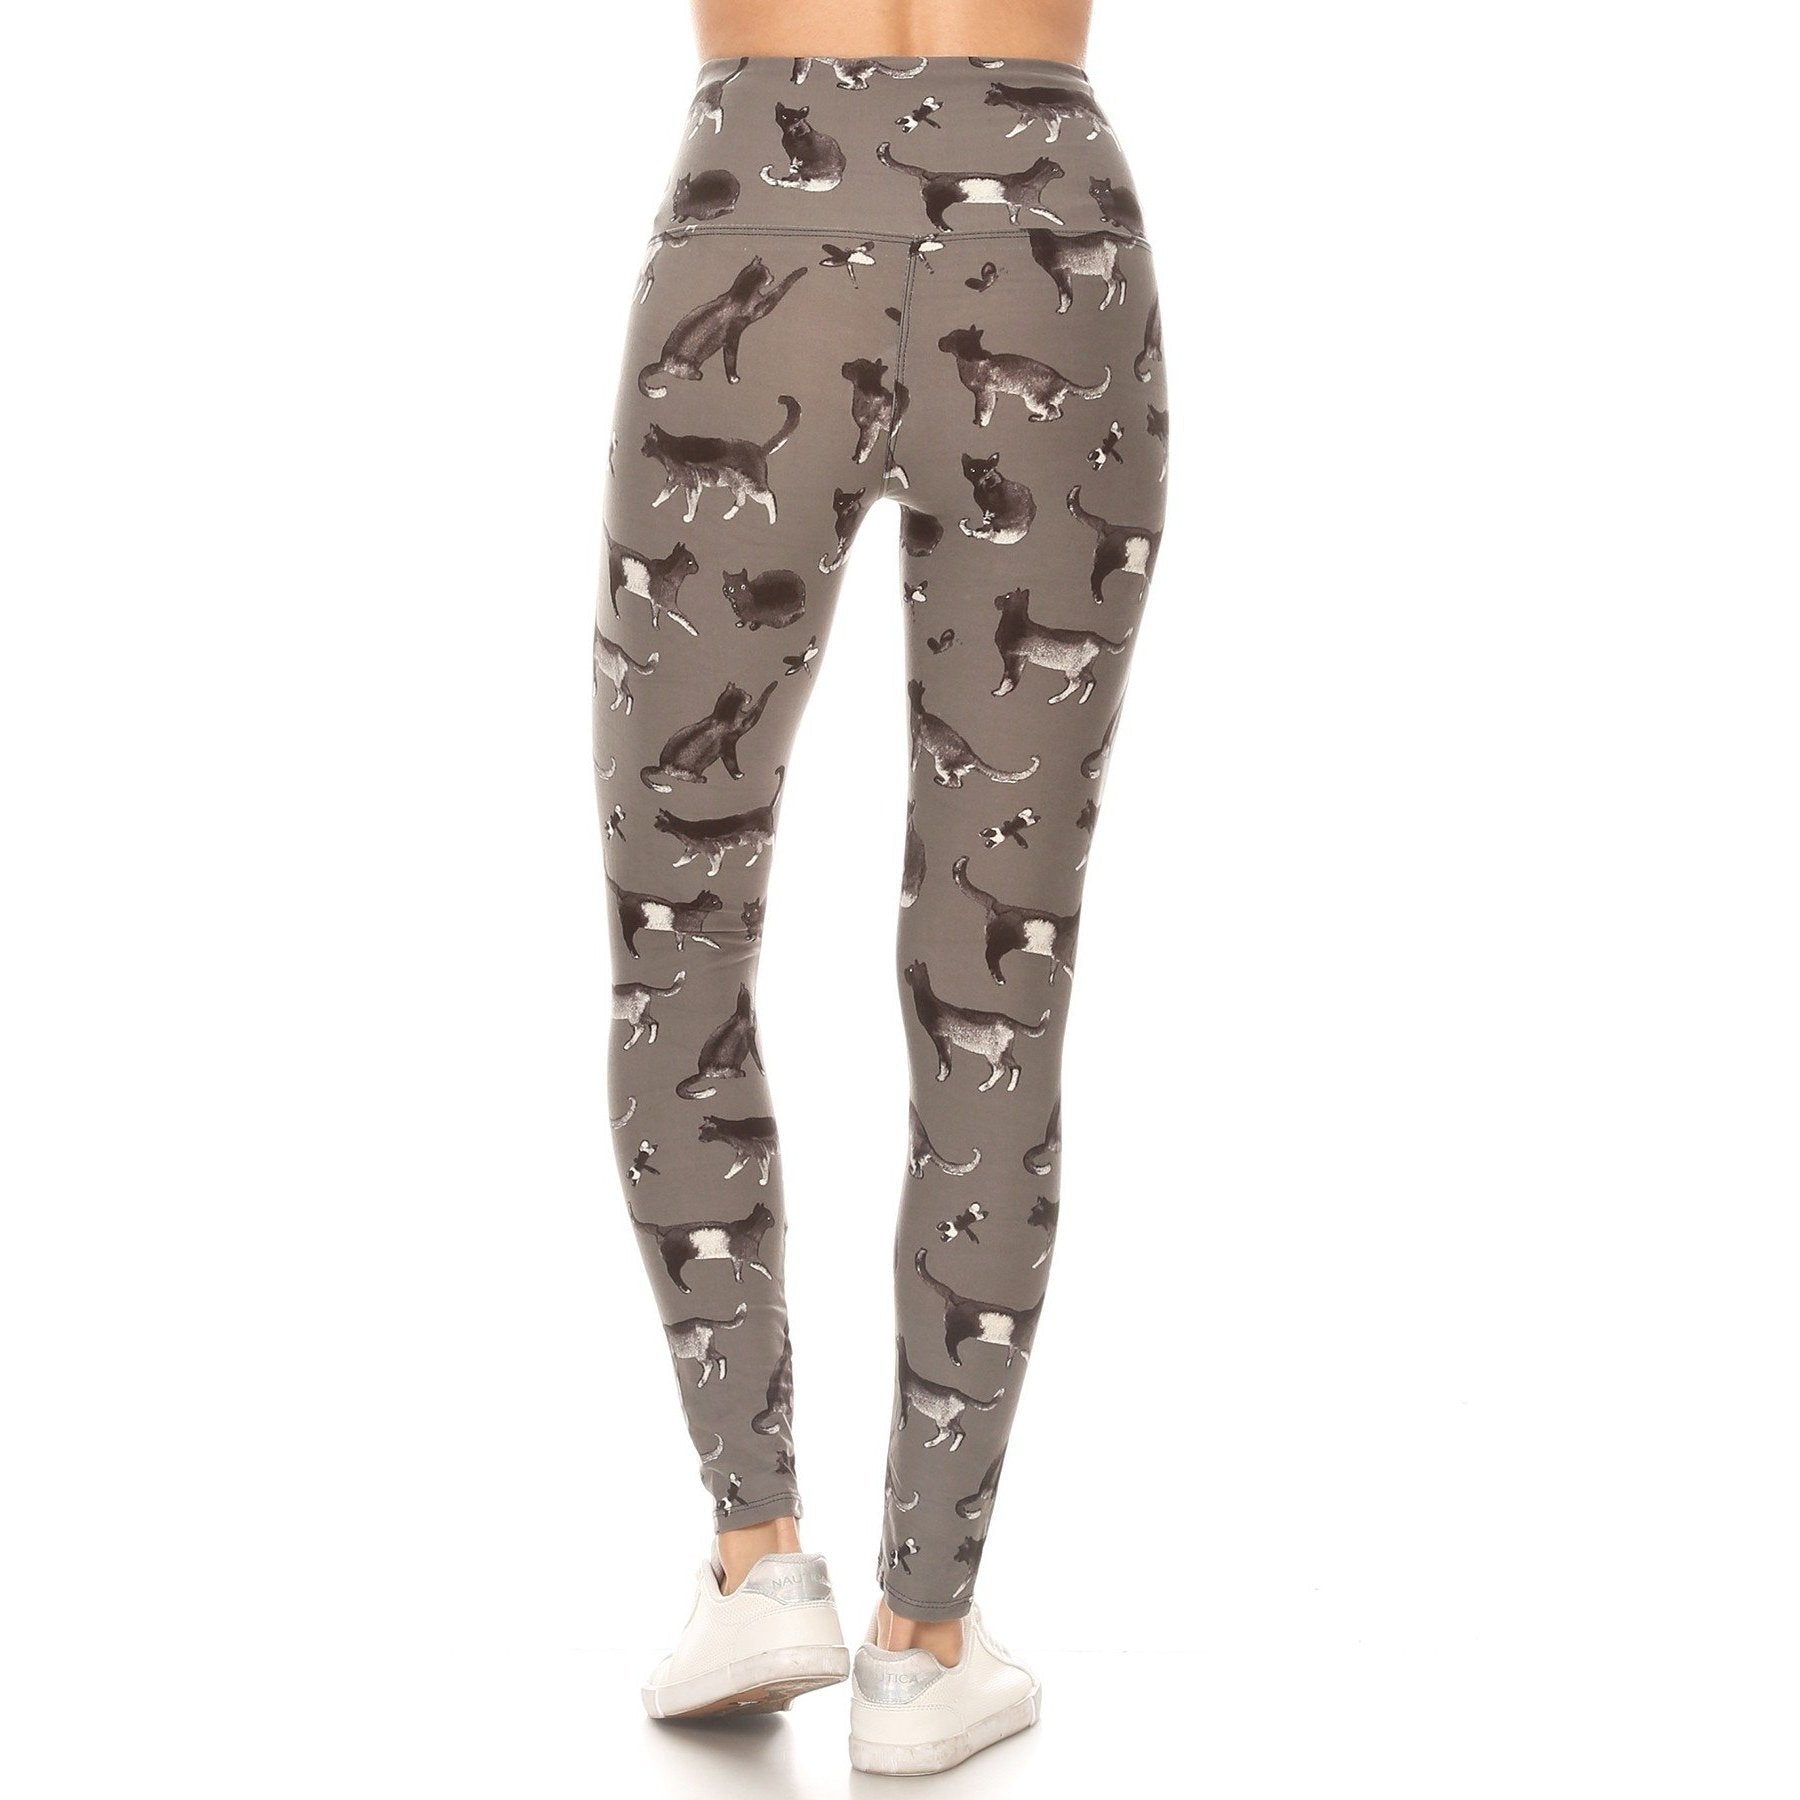 Grey Leggings With Cats On Them For Women